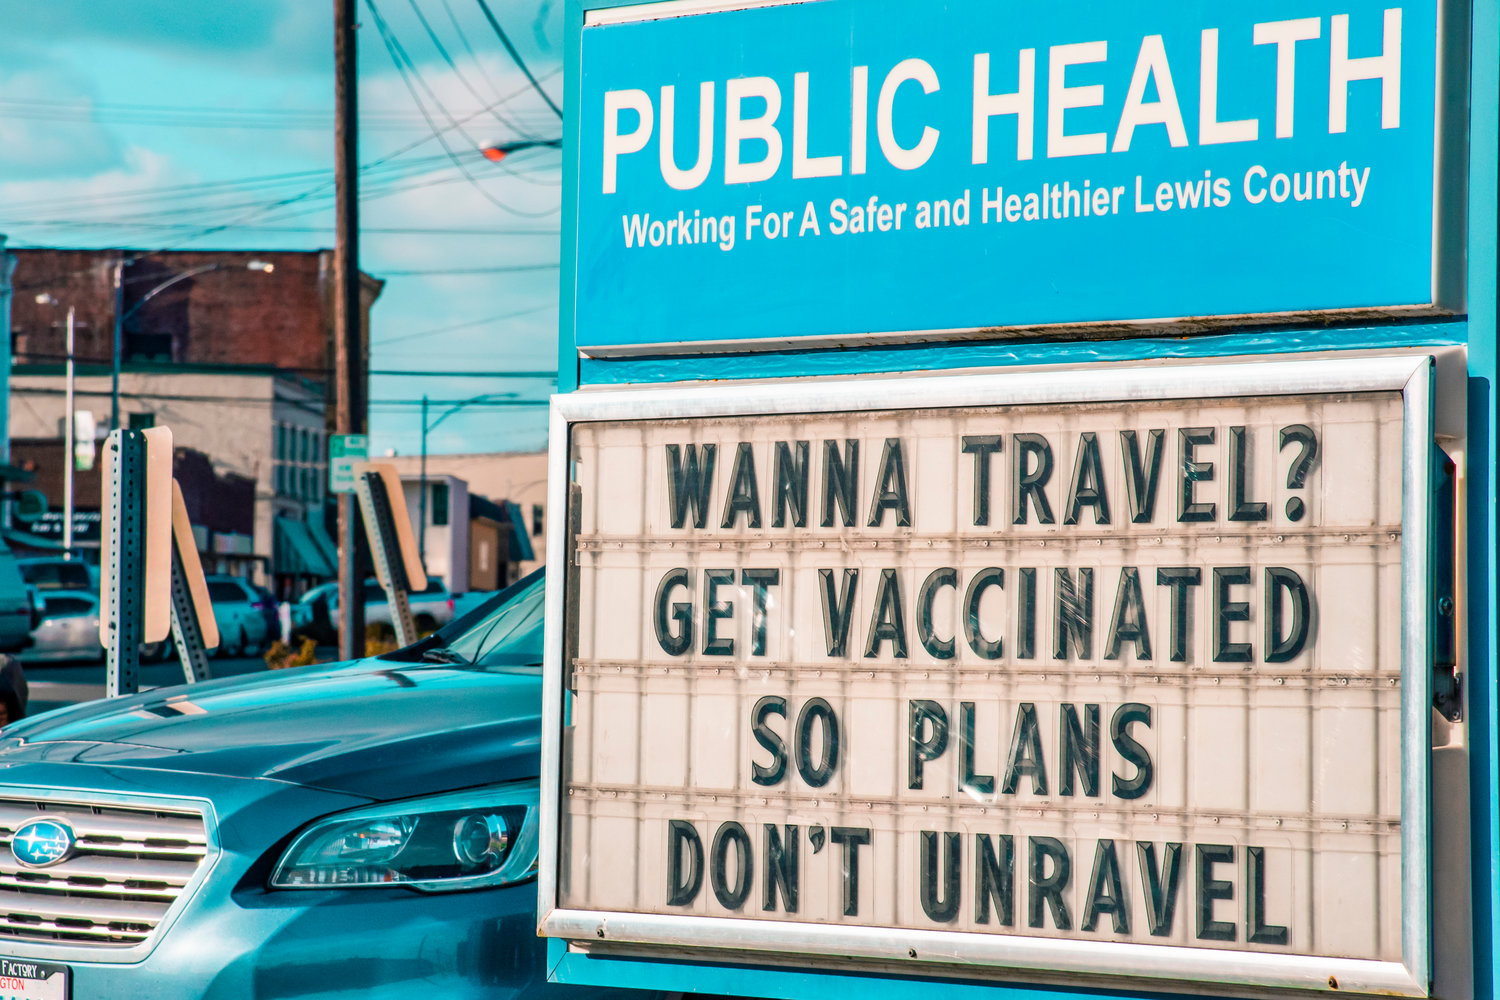 FILE PHOTO — A letter board in front of the Lewis County Public Health building urges travelers to get vaccinated last year.